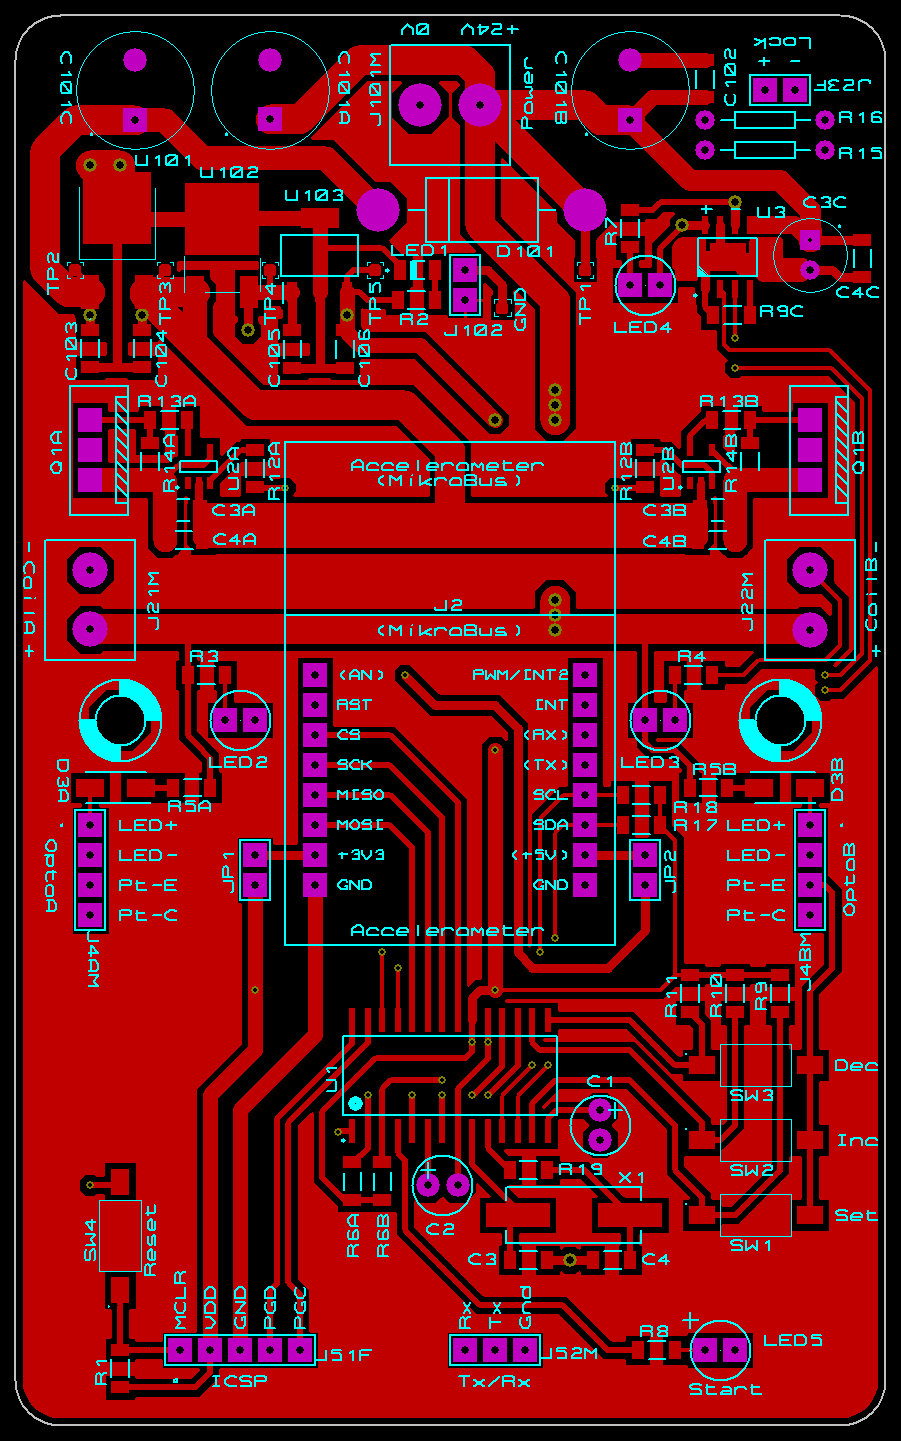 rotation-sonore_003_pcb_components_top